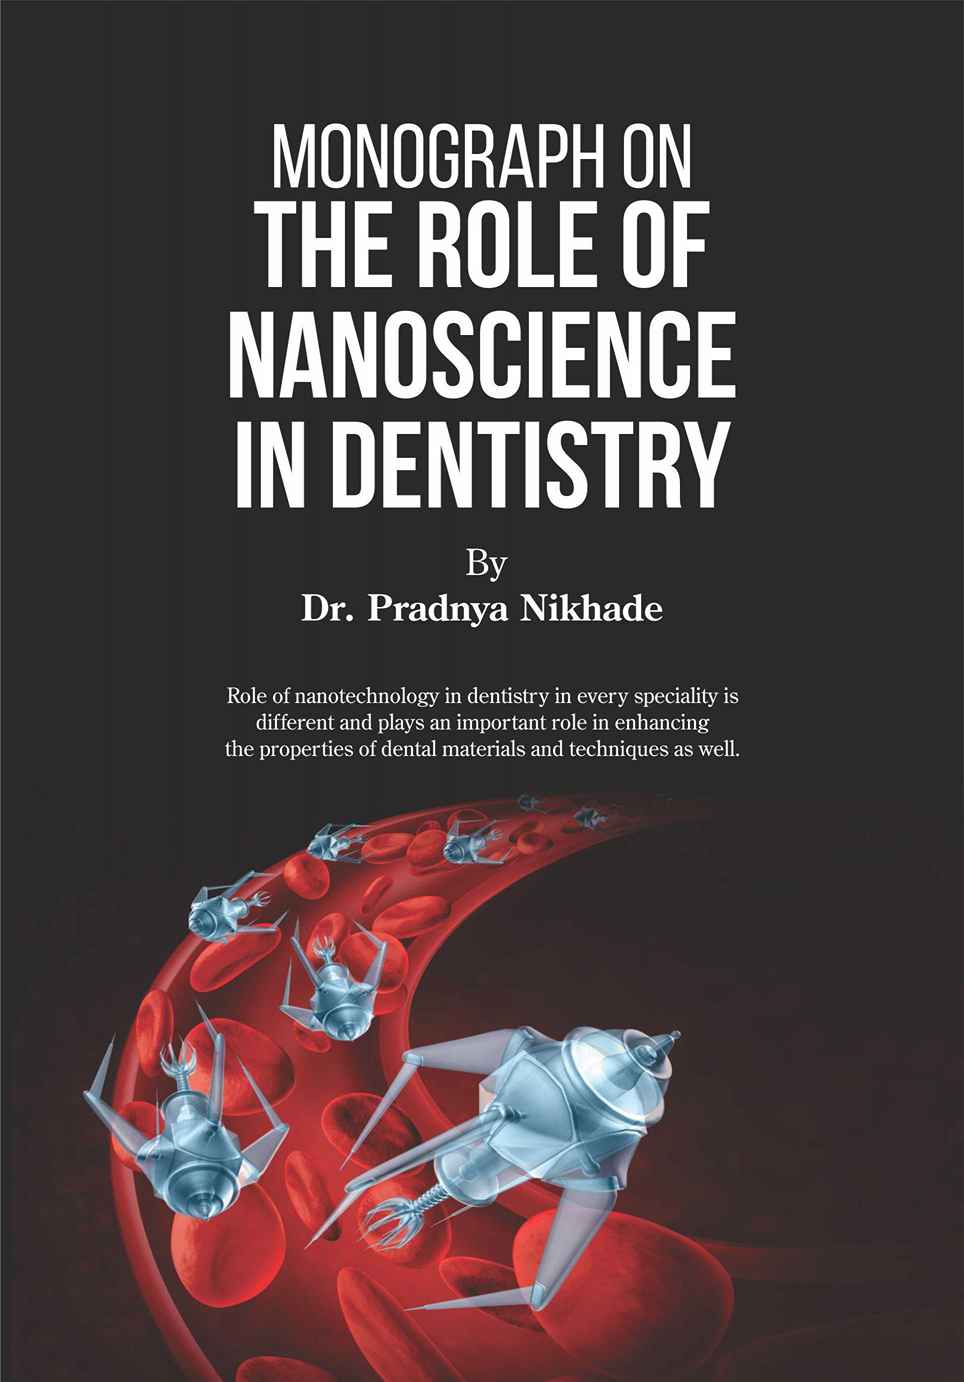 Monograph on the Role of Nanoscience in Dentistry